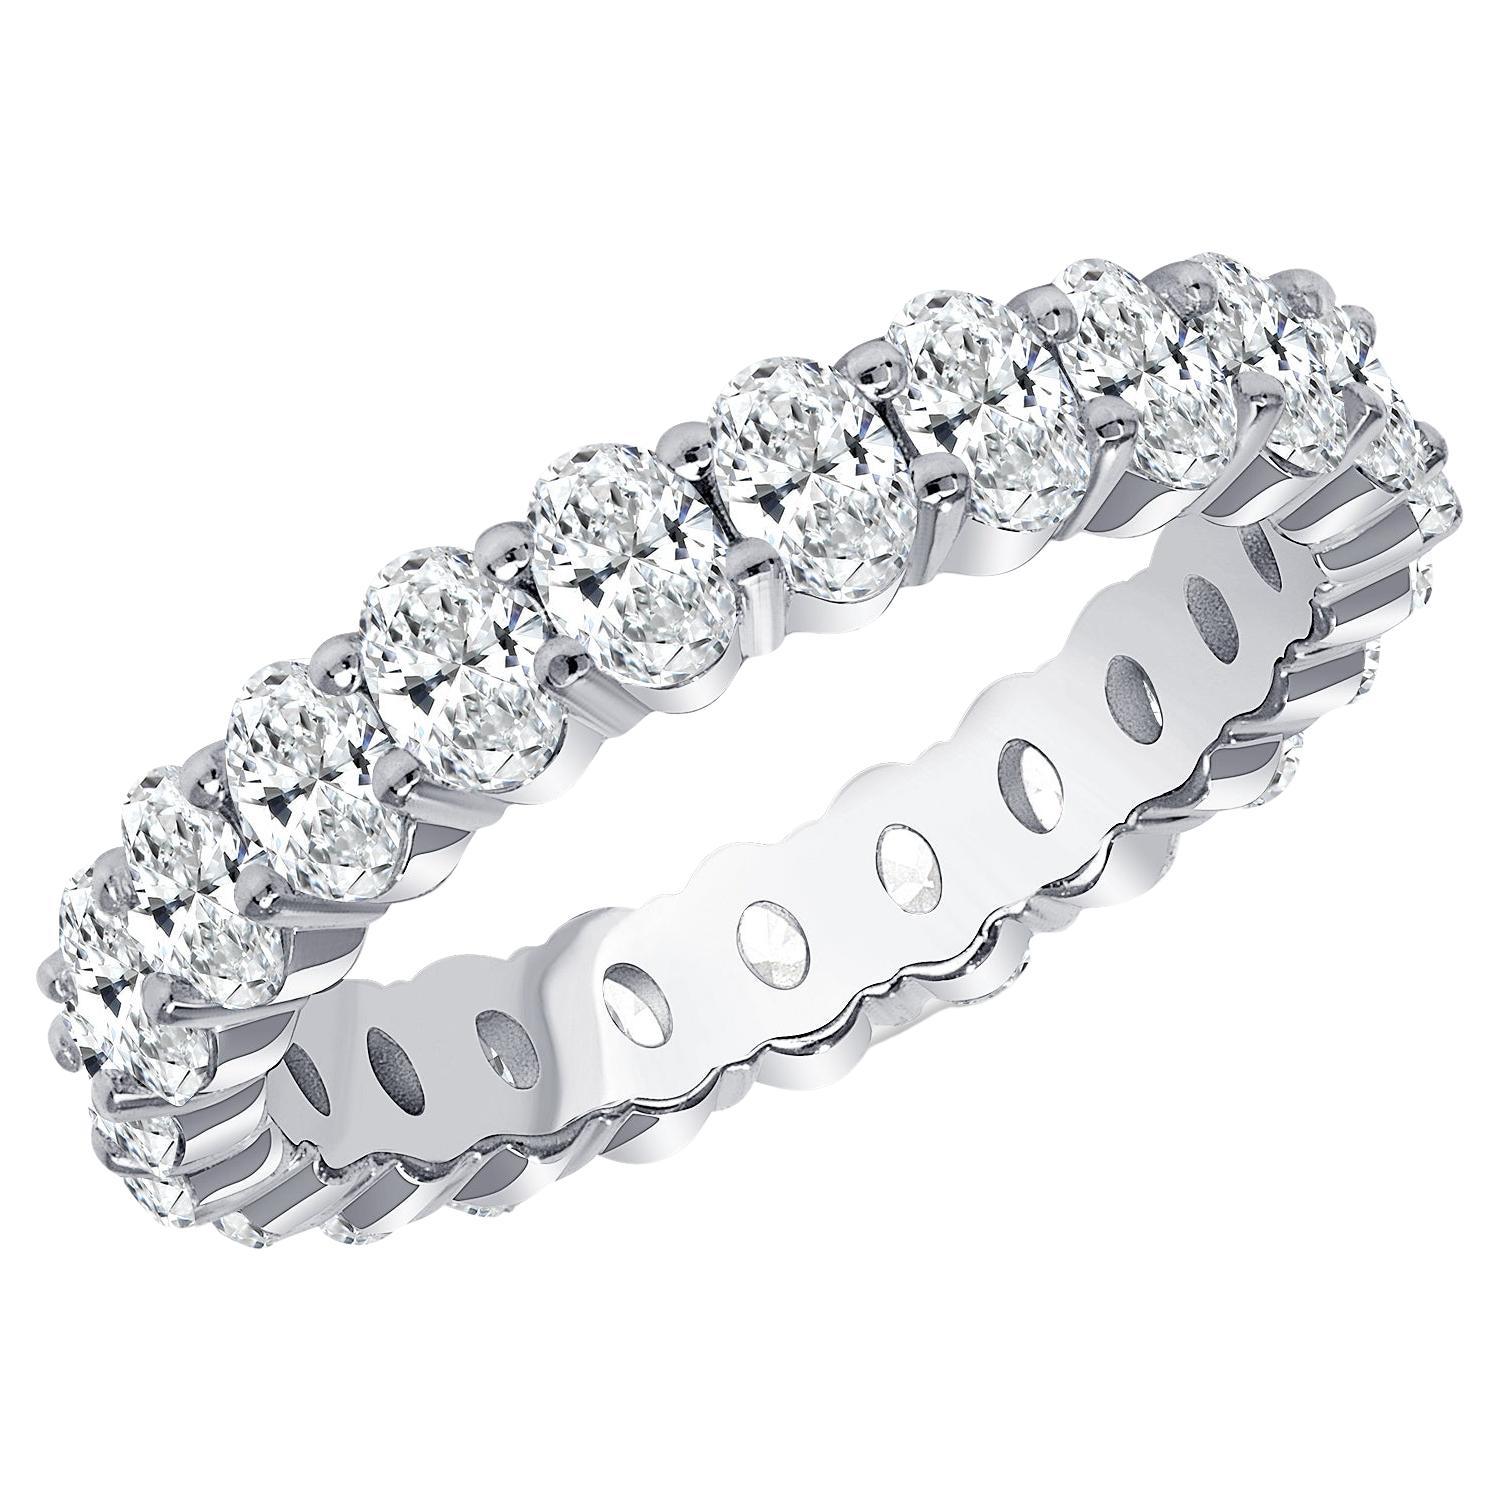 2,25 TCW Ovalschliff Diamant Eternity Band Shared Prong,  H,SI1